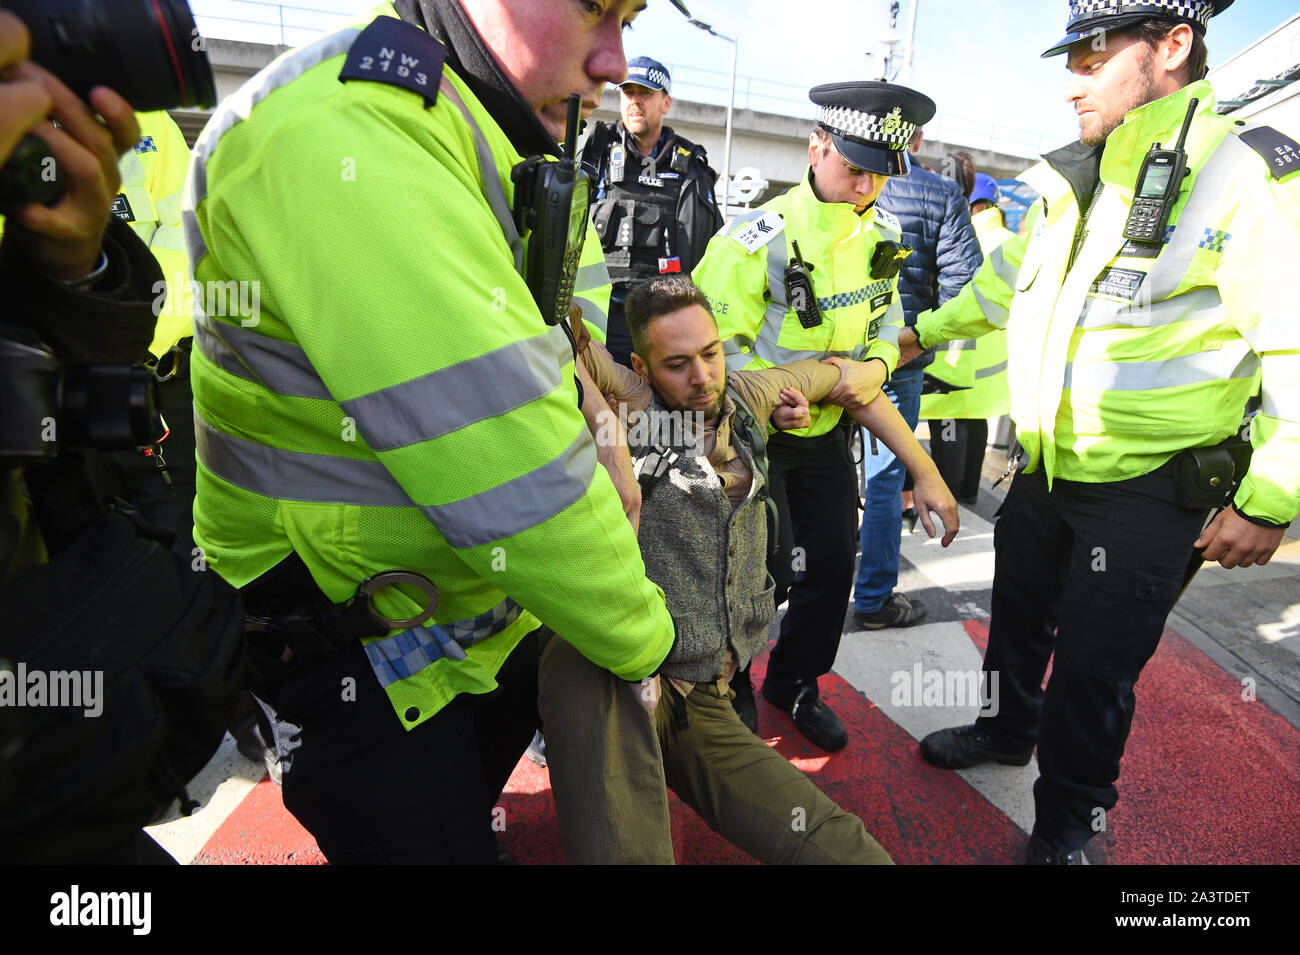 A man is removed by police officers after activists staged a 'Hong Kong style' blockage of the exit from the train station to City Airport, London, during an Extinction Rebellion climate change protest. Stock Photo